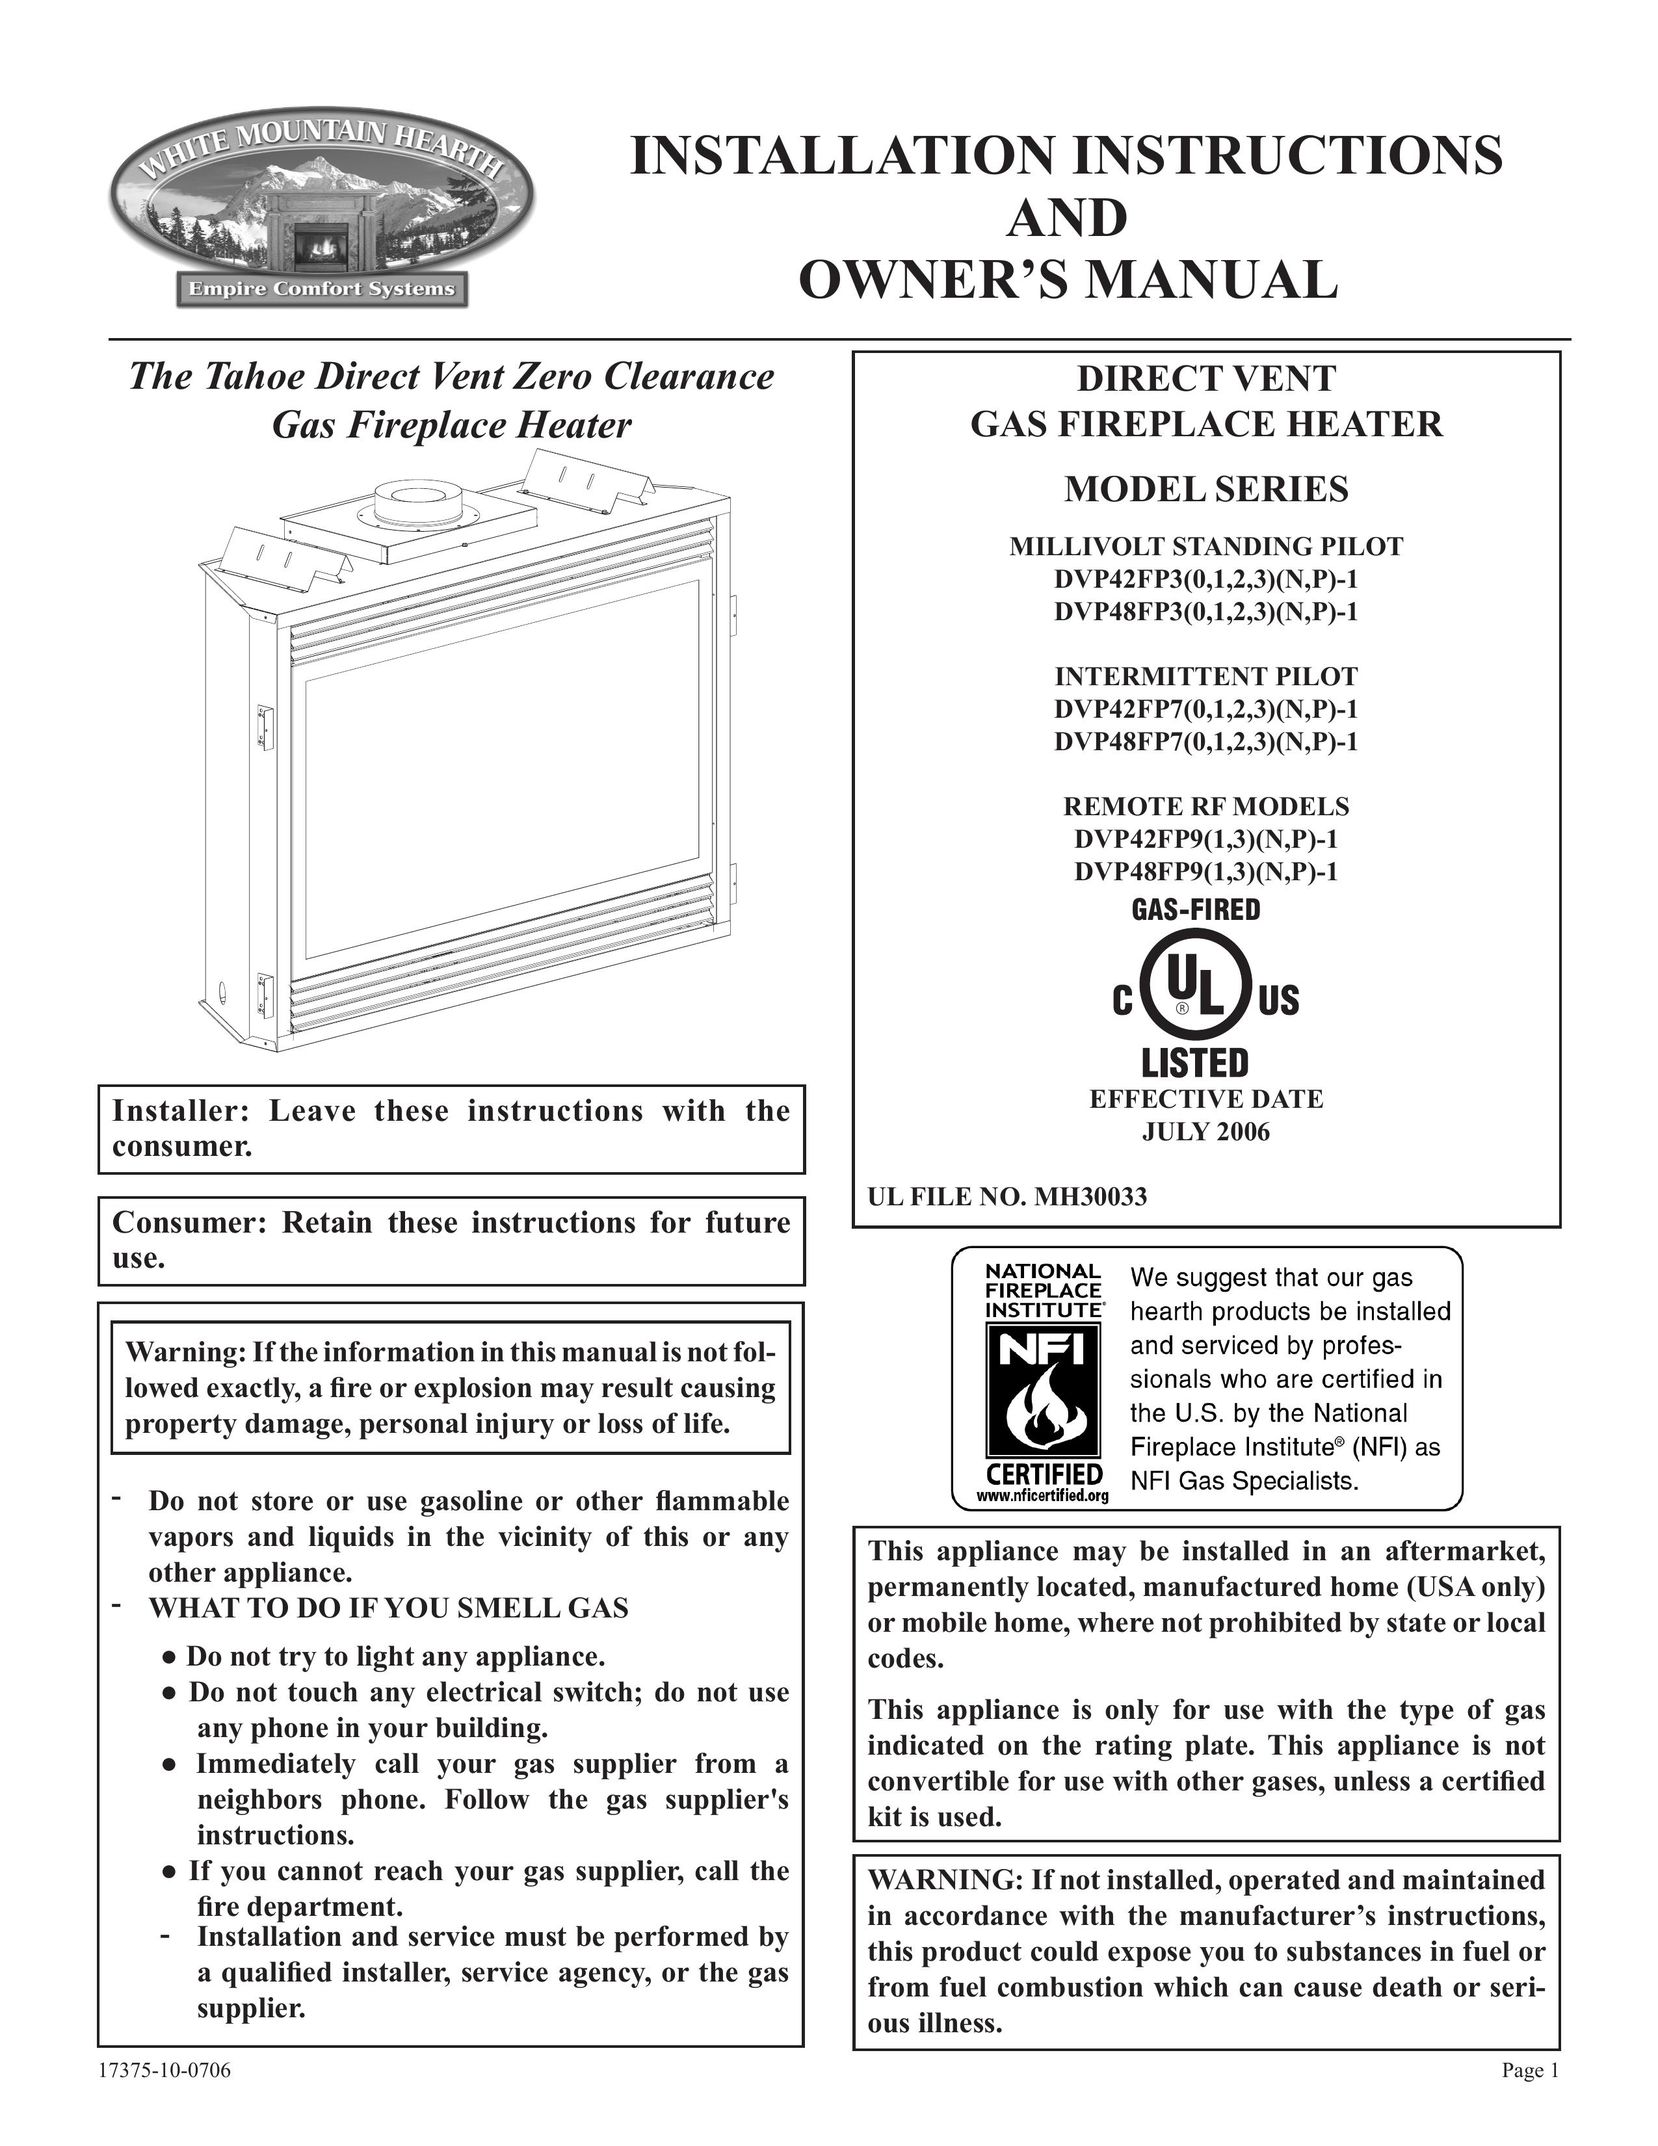 Empire Comfort Systems DVP48FP9(1,3)(N,P)-1 Indoor Fireplace User Manual